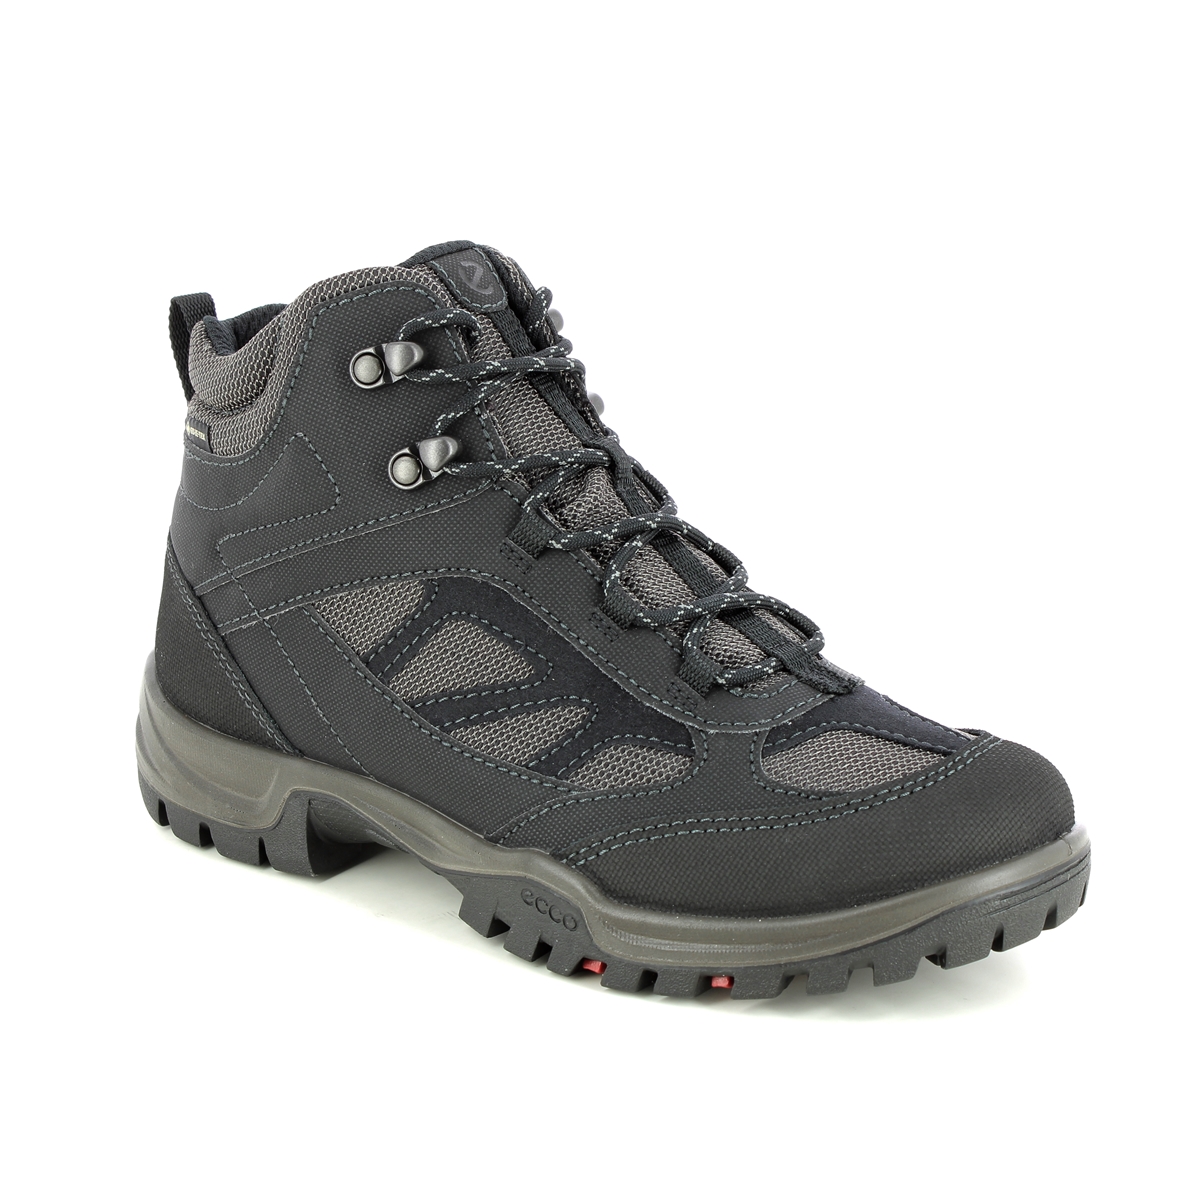 Ecco Xpedition W Mid Gtx Black Womens Walking Boots 811273-51526 In Size 37 In Plain Black